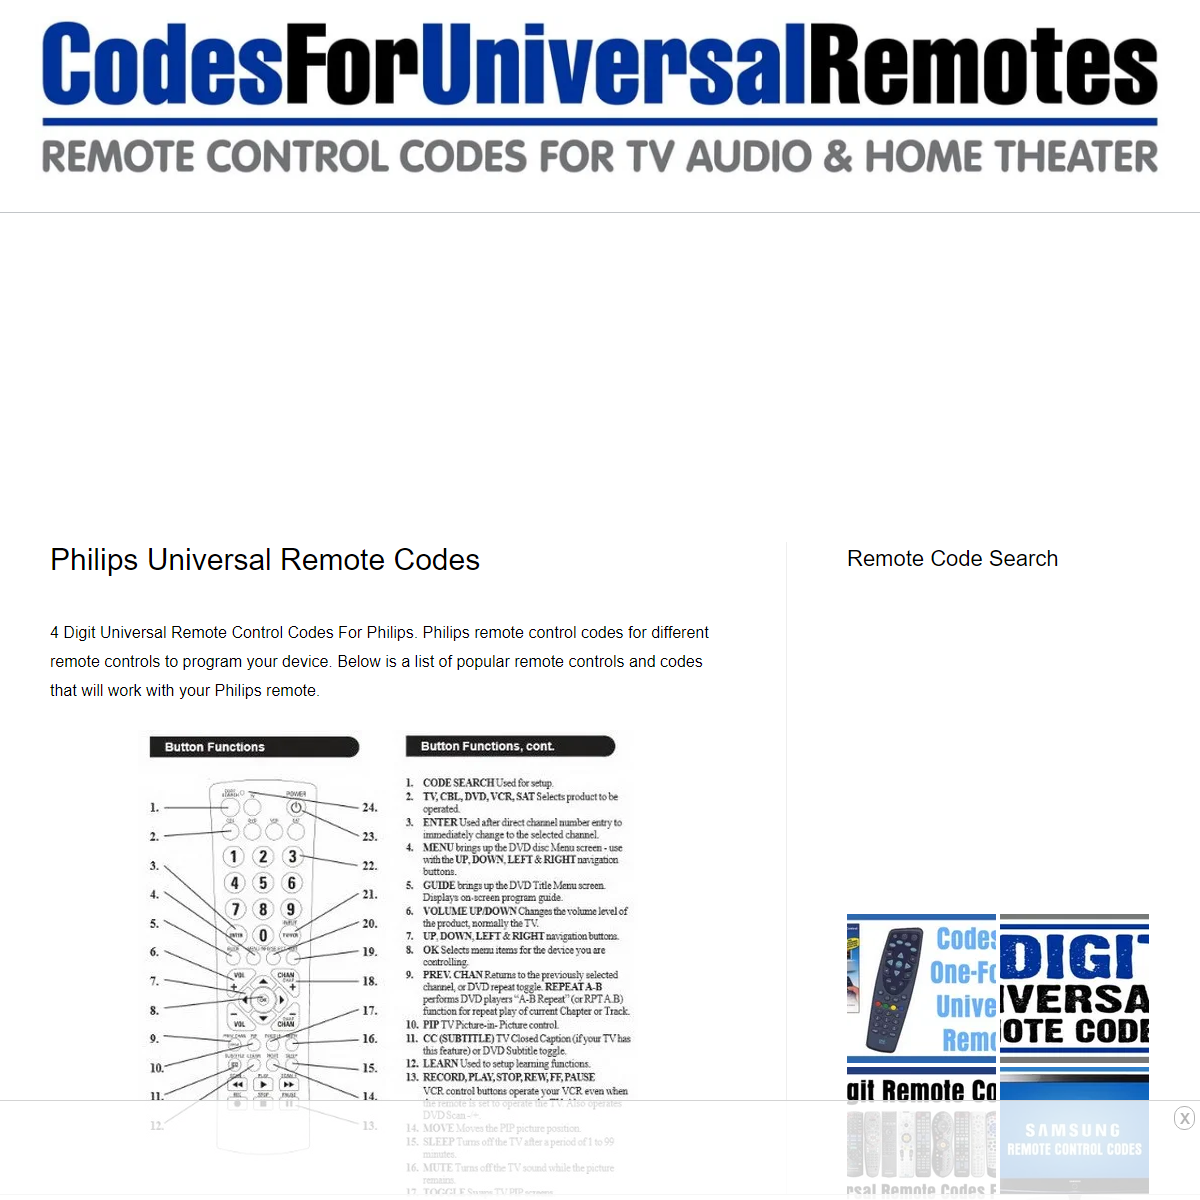 A complete backup of https://codesforuniversalremotes.com/philips-universal-remote-codes-2/